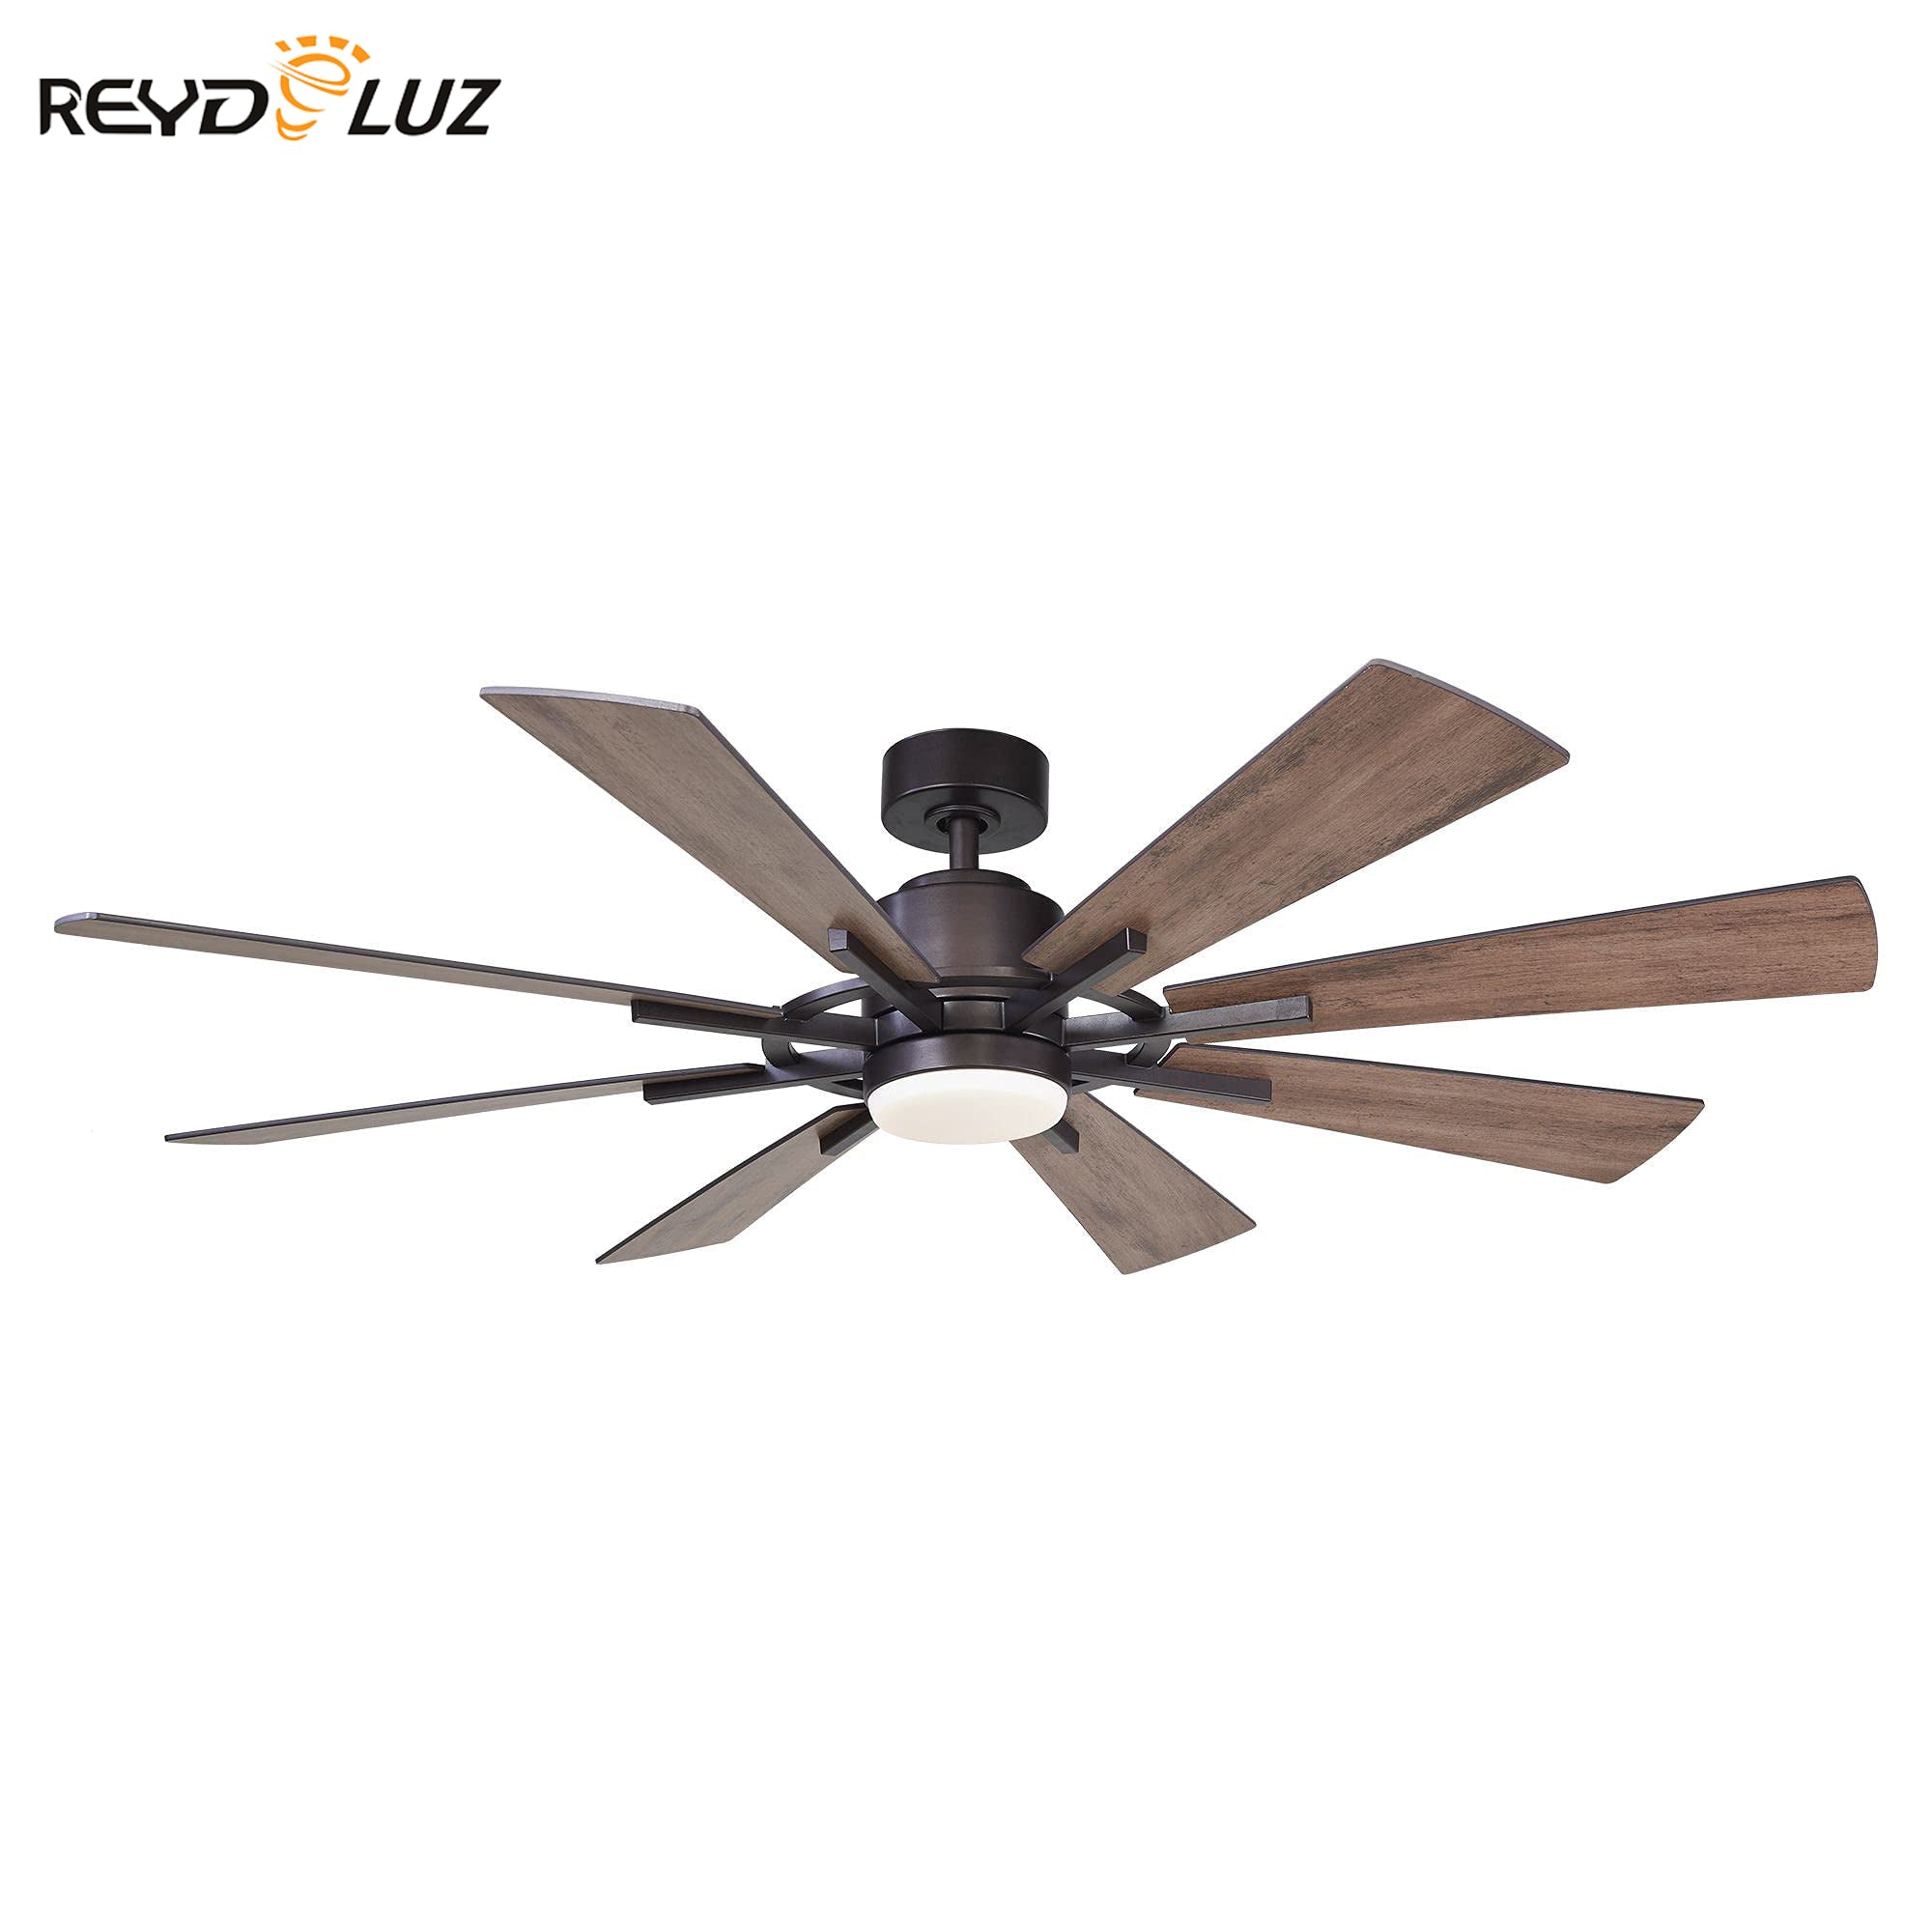 REYDELUZ 60" Ceiling Fan with Remote Modern Windmill Fan for Covered Outdoor.